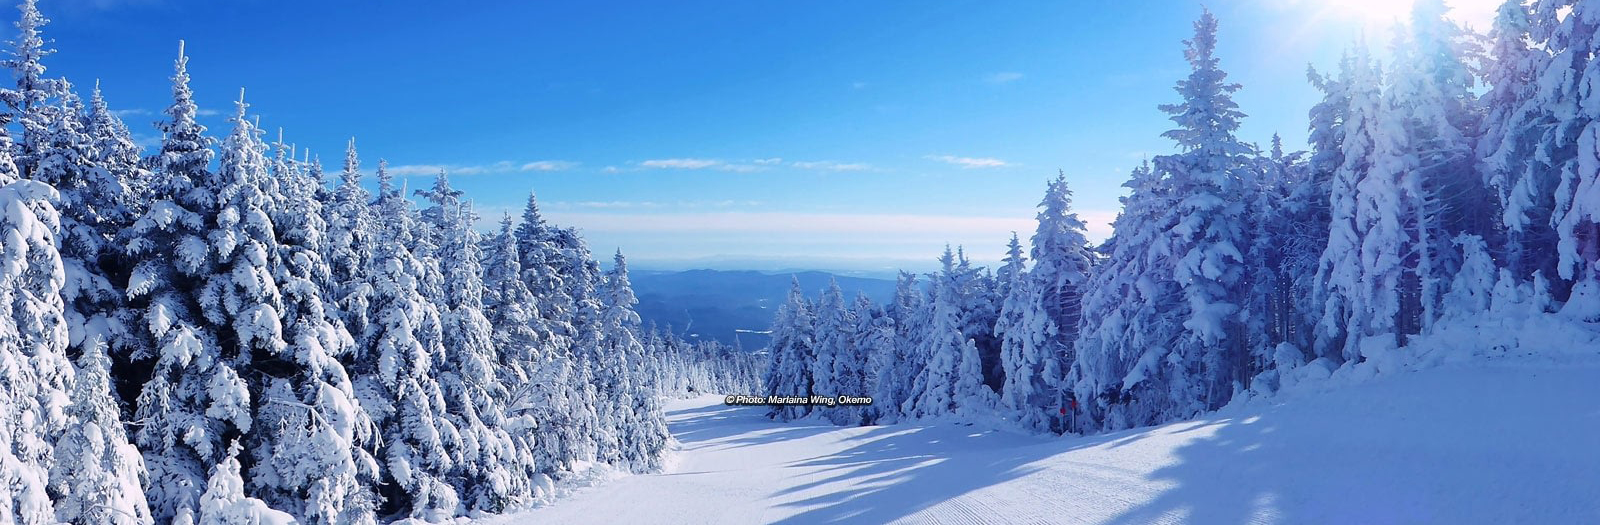 Okemo Ski Resort lodging and vacation packages